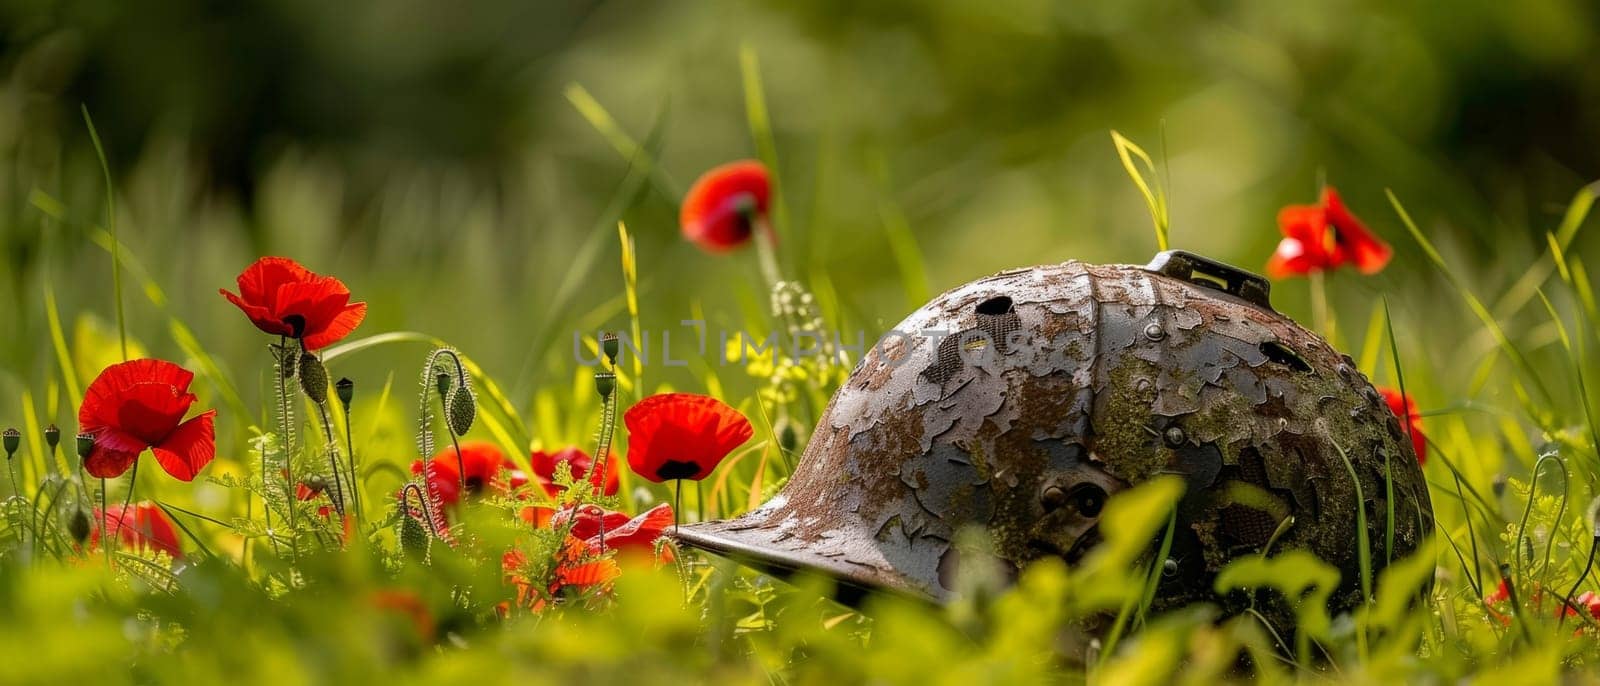 A battered military helmet rests amidst a sea of vibrant red poppies, a poignant juxtaposition of the harsh realities of war and the resilience of nature's beauty